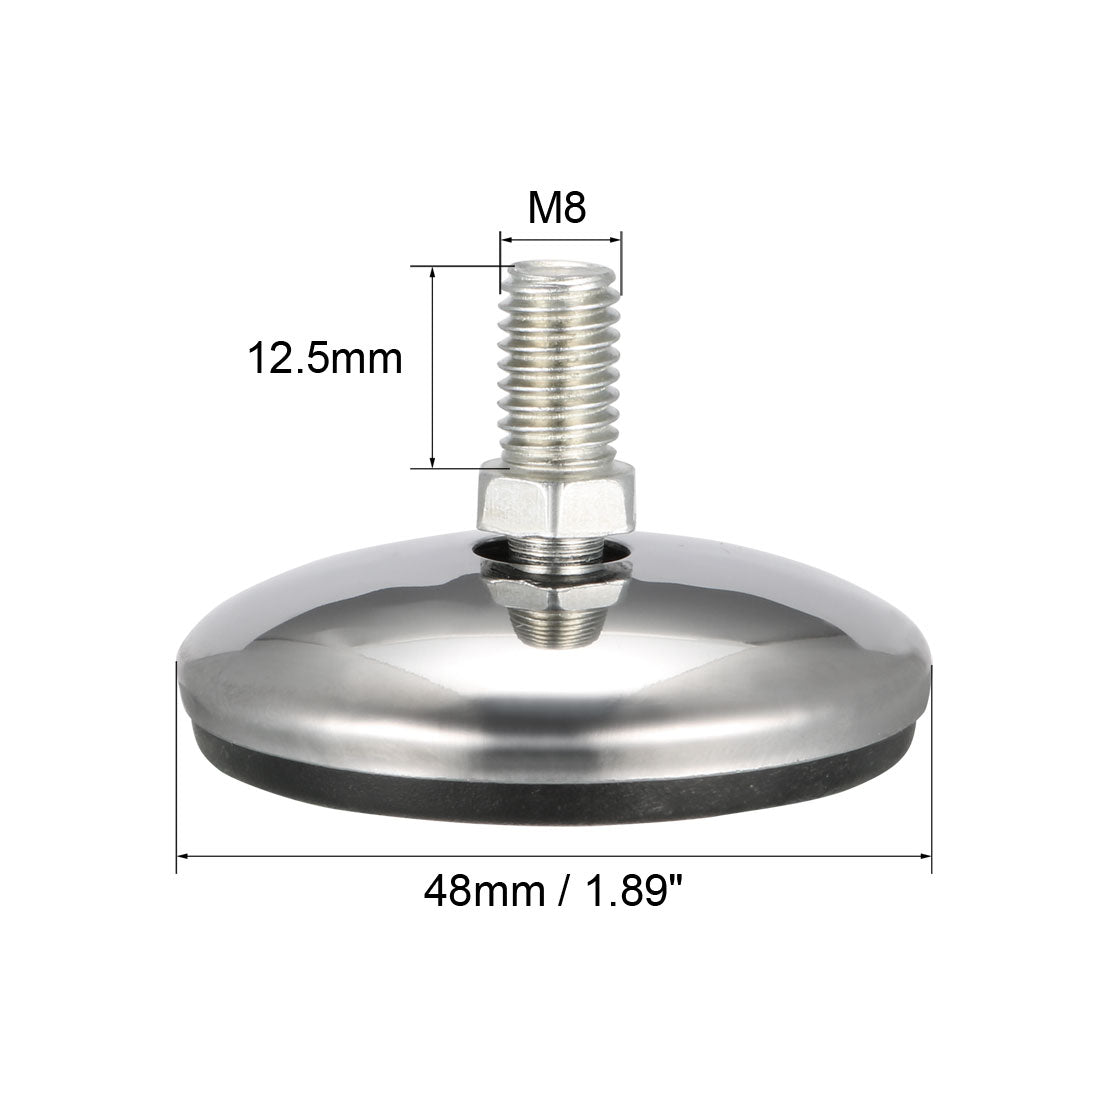 uxcell Uxcell Furniture Levelers, 18mm to 22mm Adjustable Height M8 x 12.5mm Threaded, 4Pcs